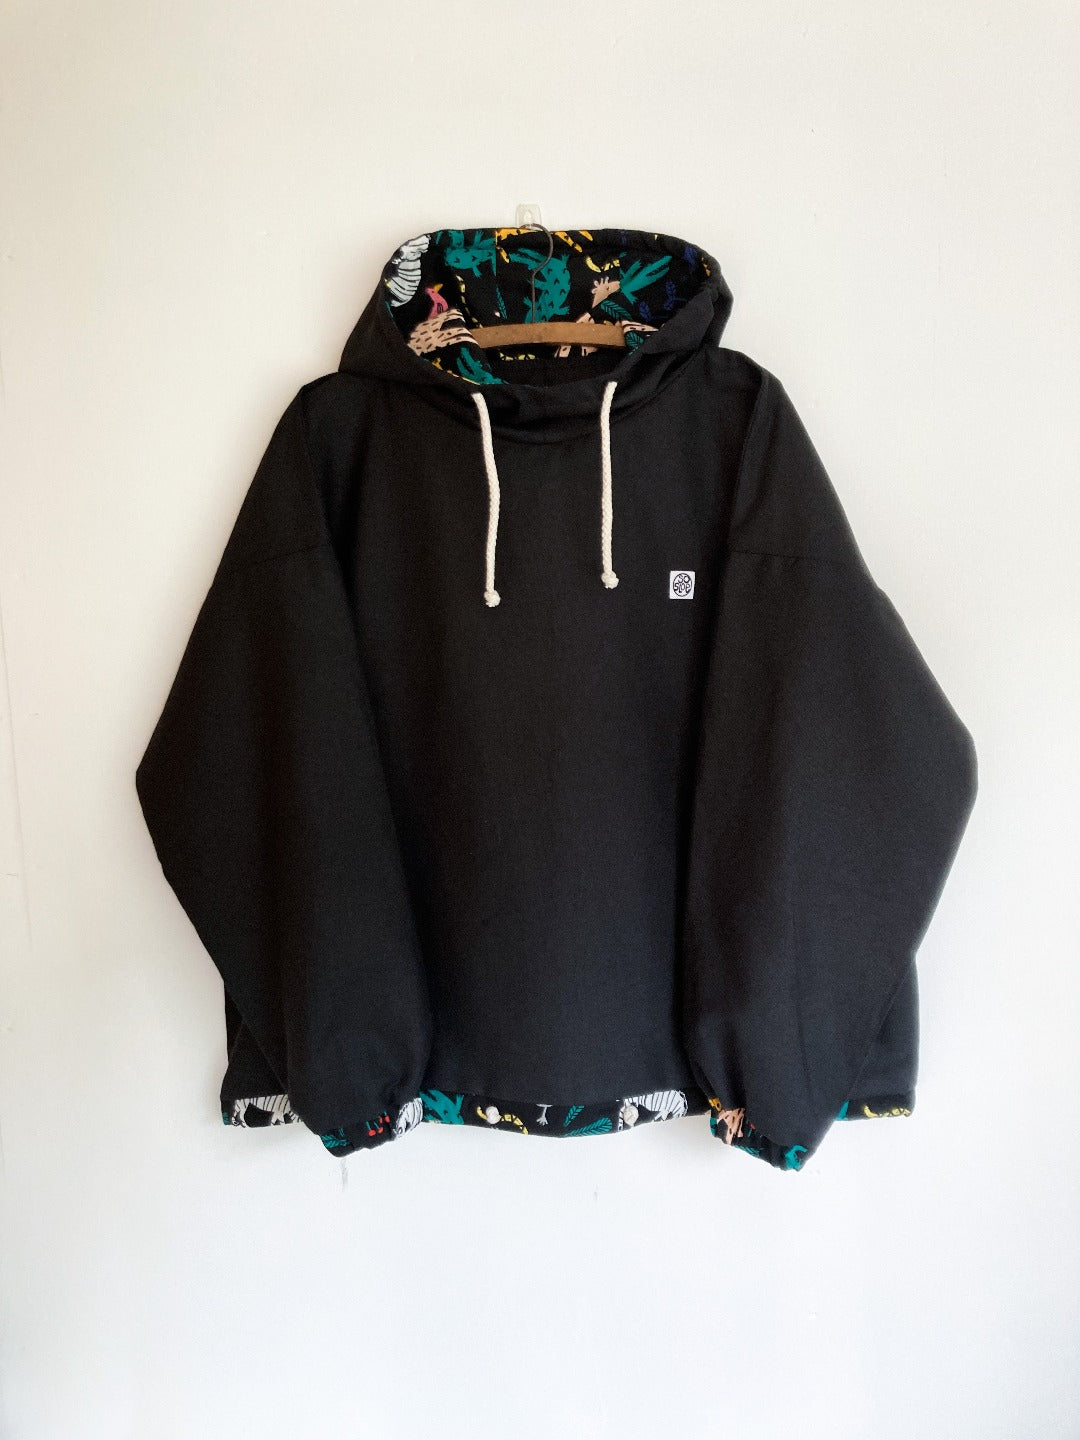 Black pullover with jungle print lines hood and cuffs.